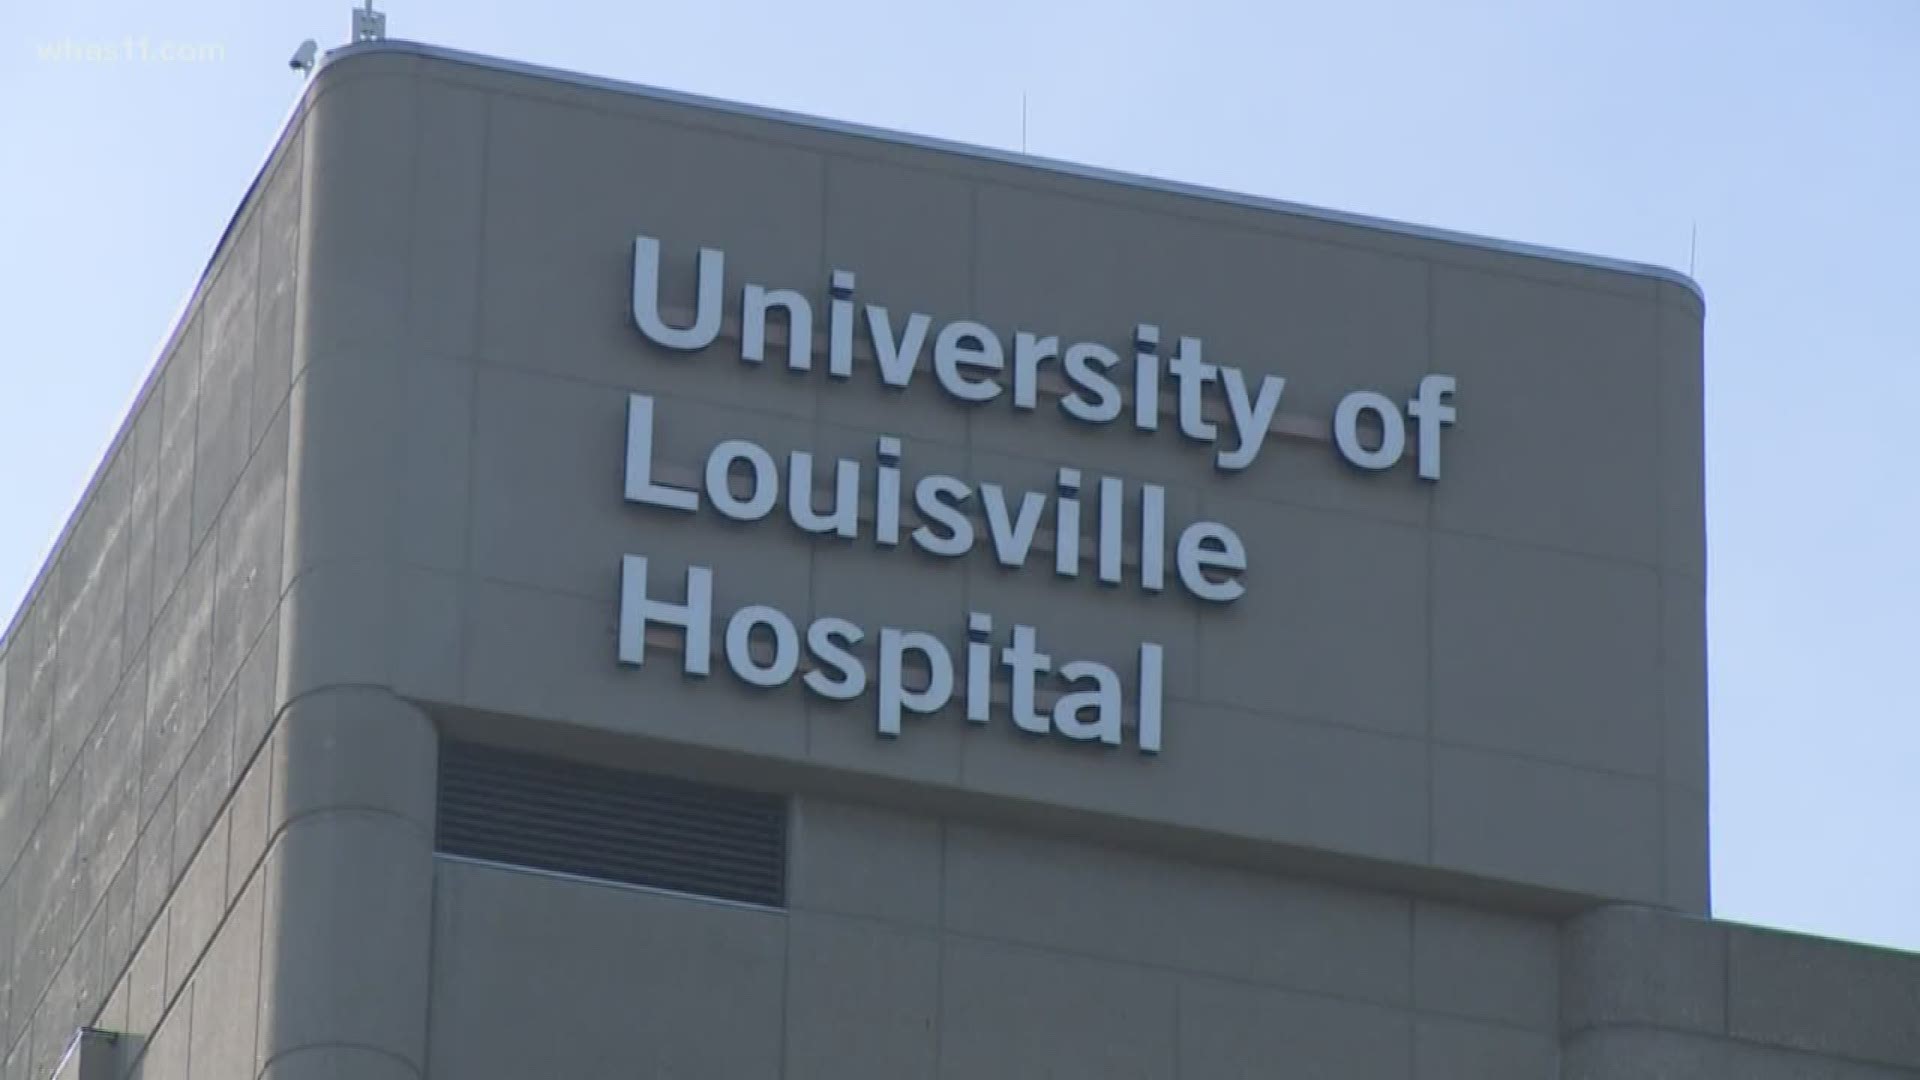 University of Louisville can now test 1,000 COVID-19 cases per day